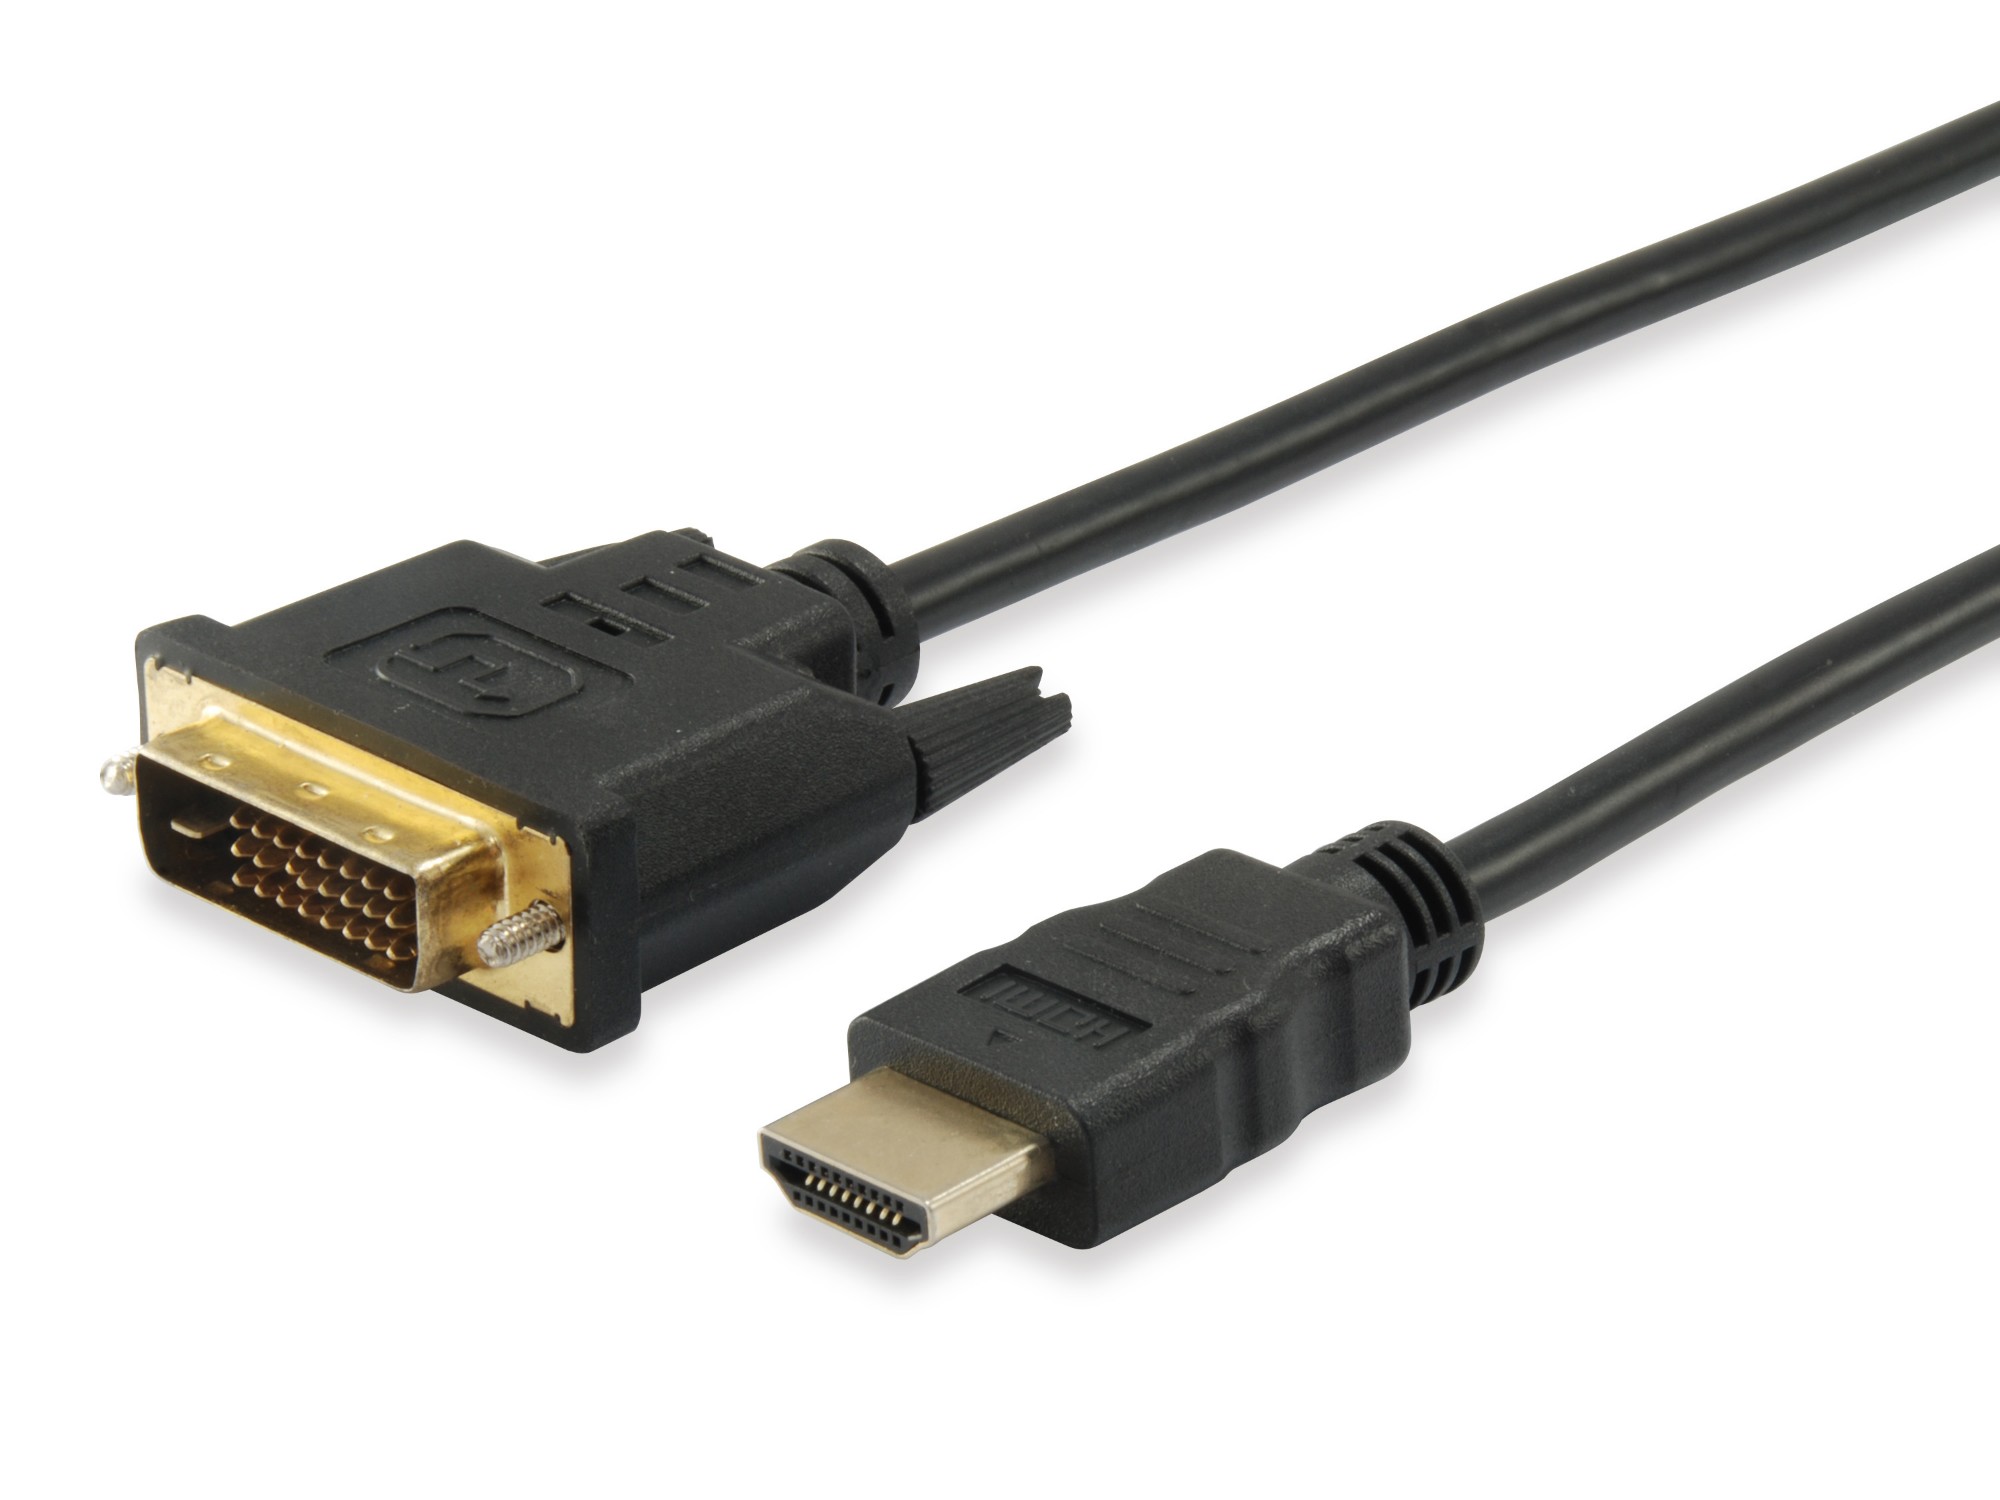 Photos - Cable (video, audio, USB) Equip HDMI to DVI-D Single Link Cable, 2m 119322 